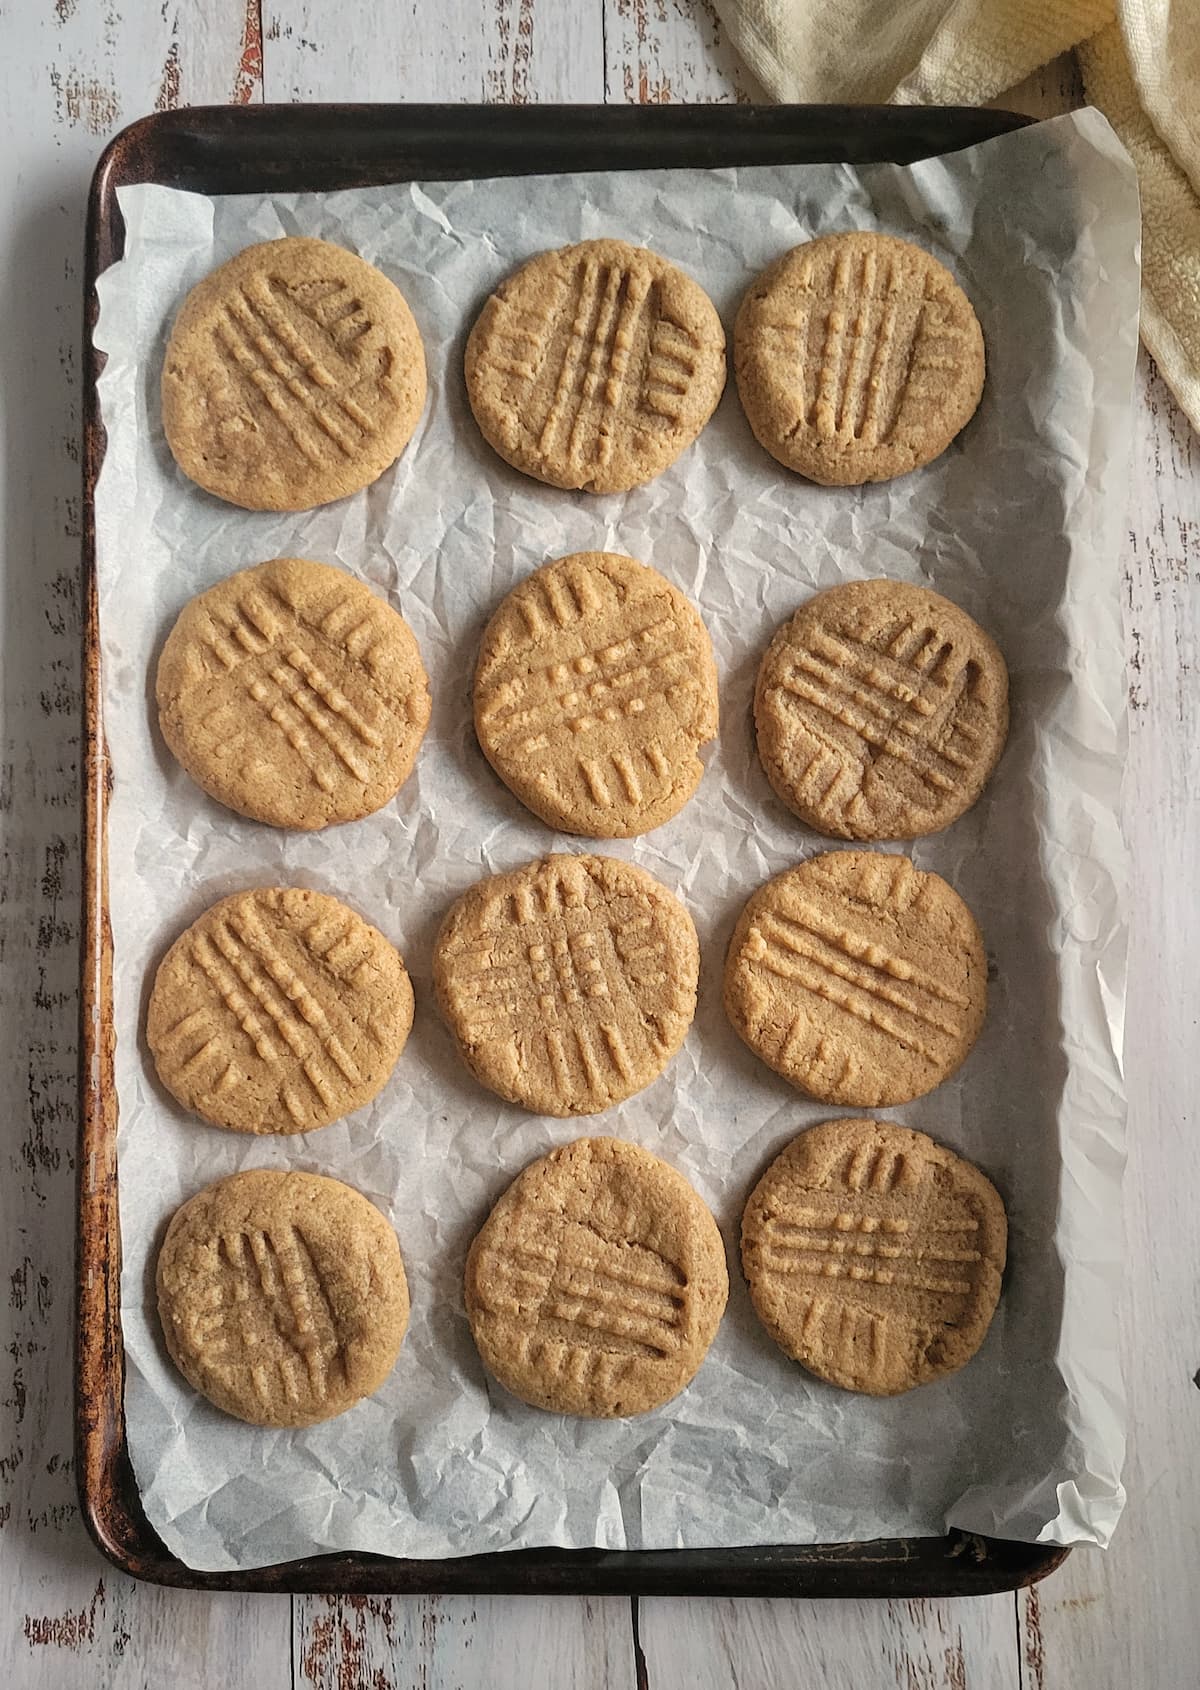 freshly baked peanut butter cookies on a parchment lined baking sheet